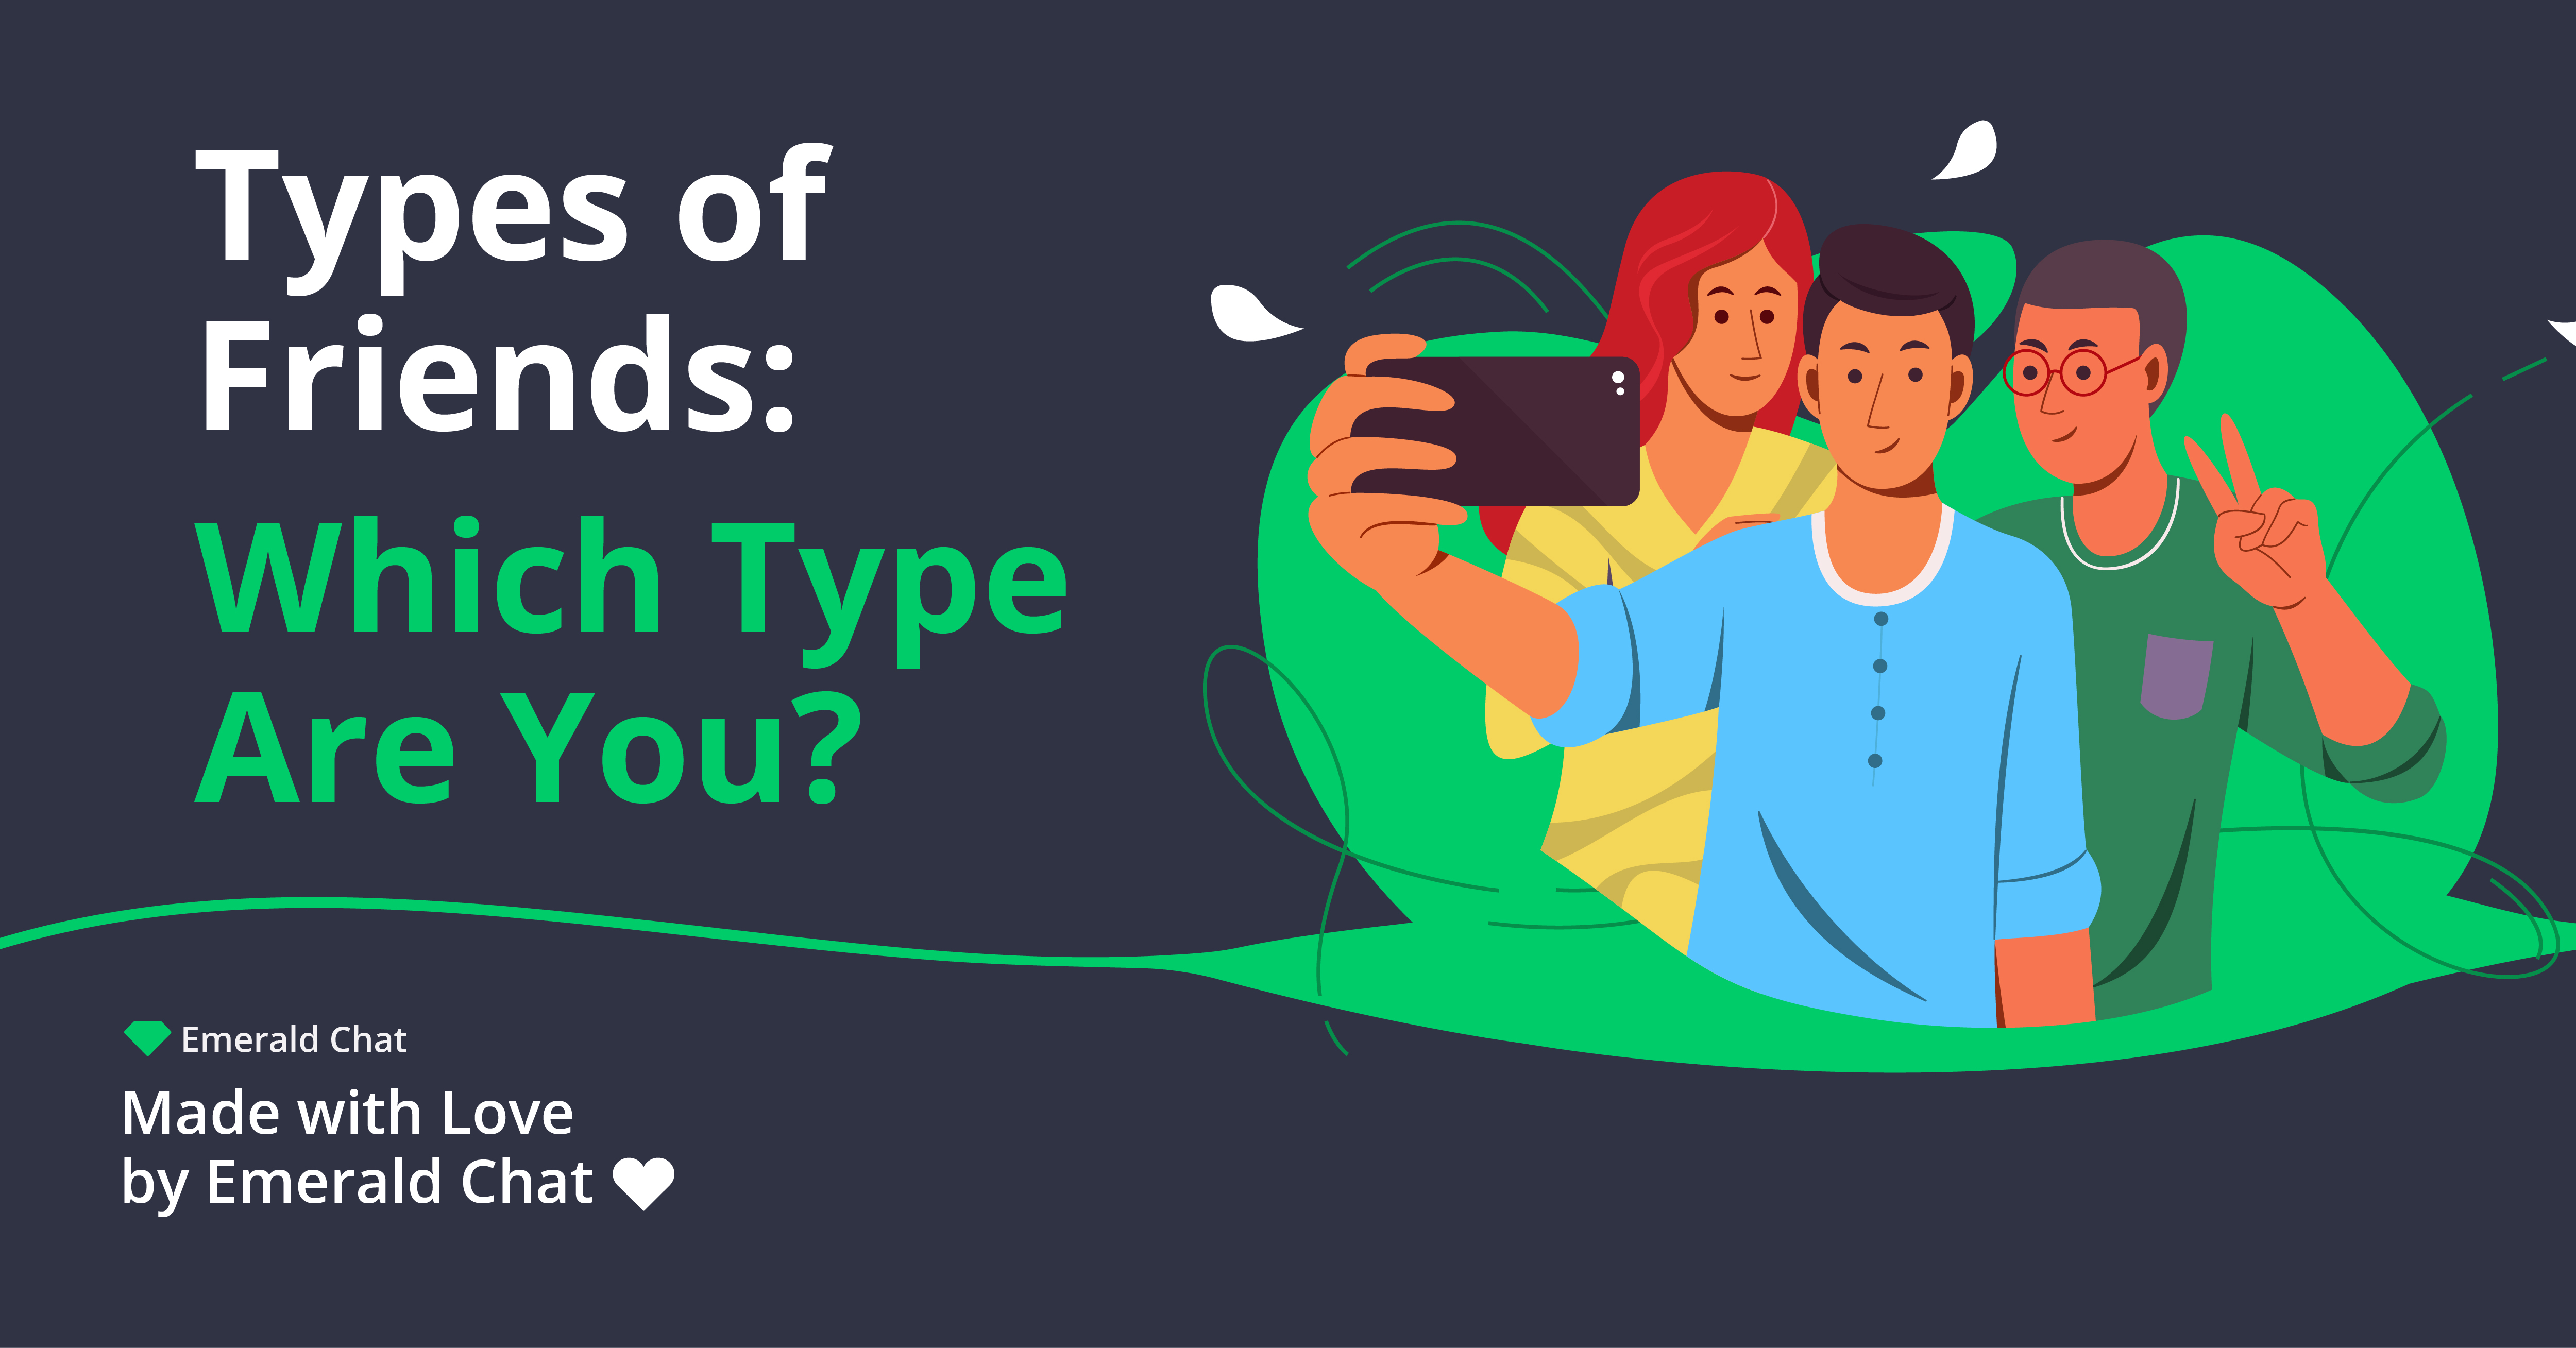 Types of Friends: Which Type Are You?